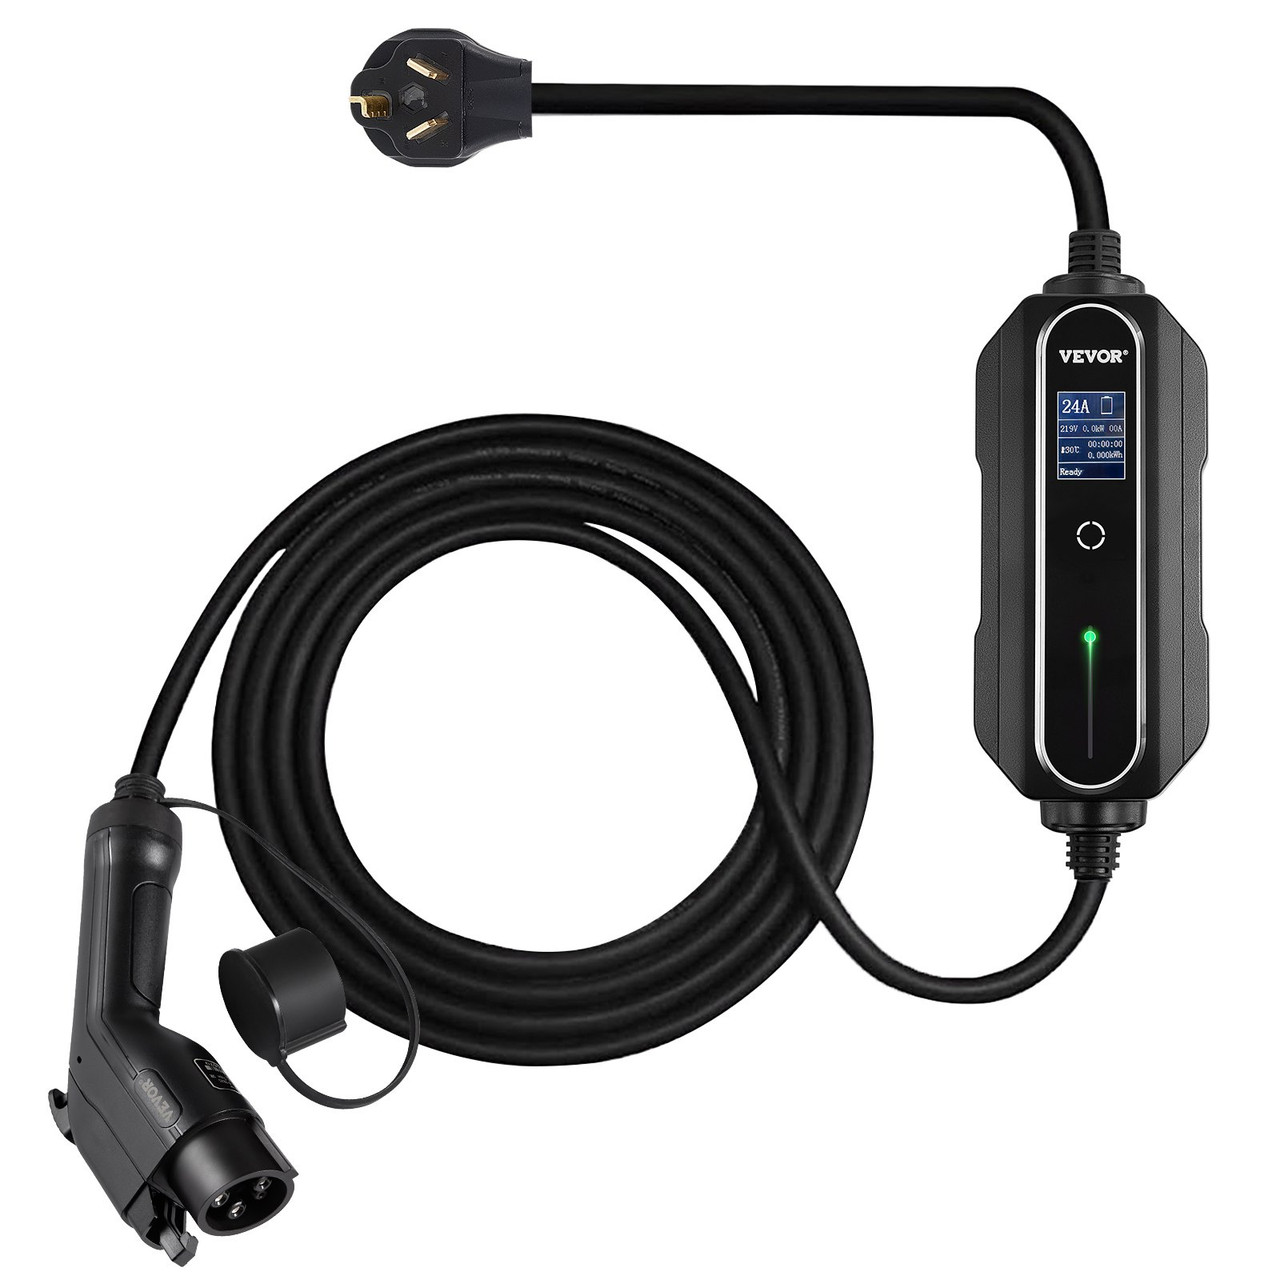 Portable electric vehicle charger review